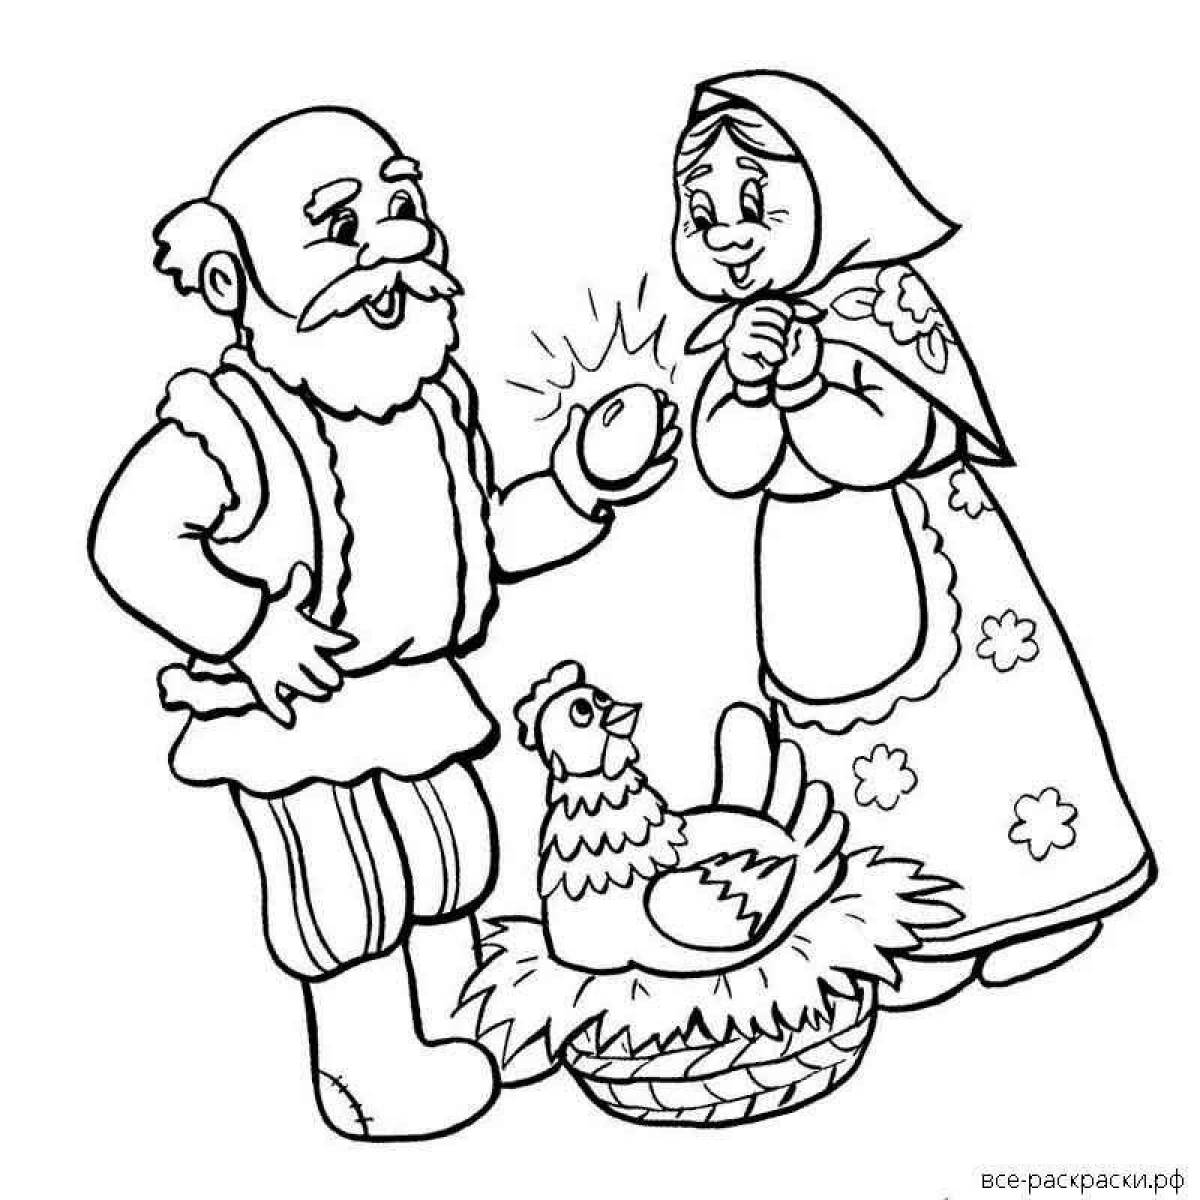 Coloring page kind grandparents